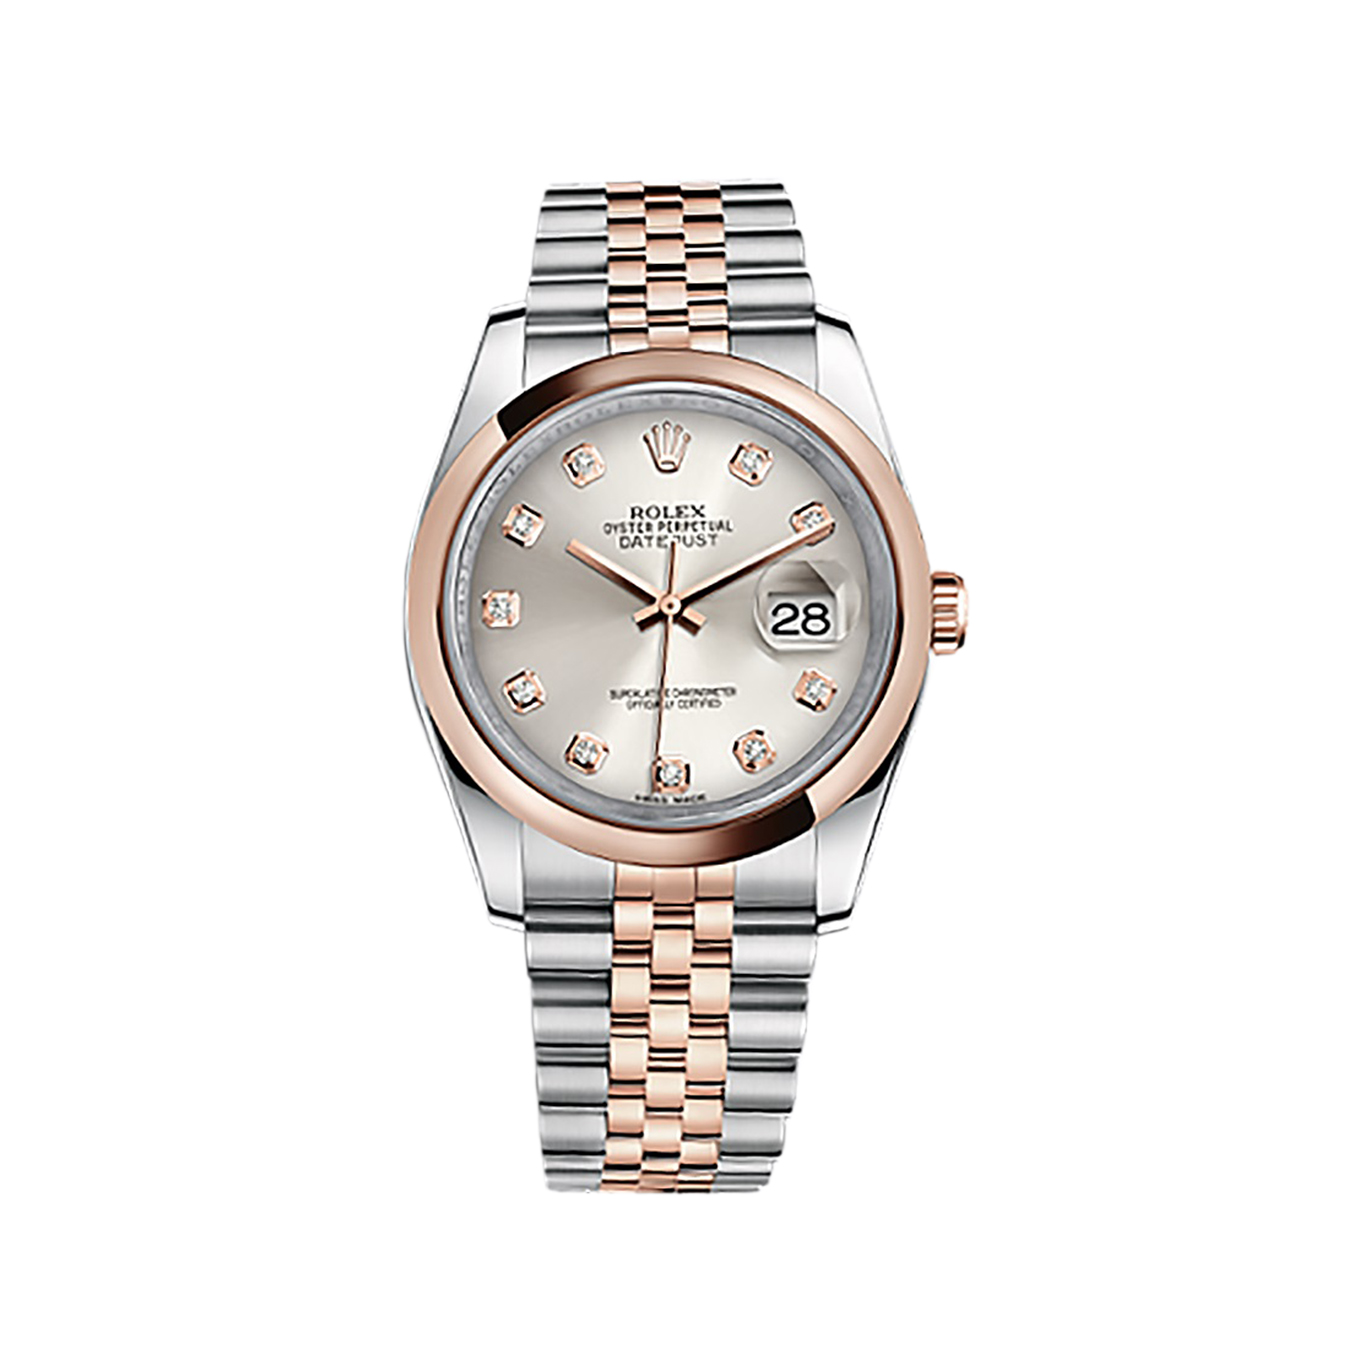 Datejust 36 116201 Rose Gold & Stainless Steel Watch (Silver Set with Diamonds) - Click Image to Close